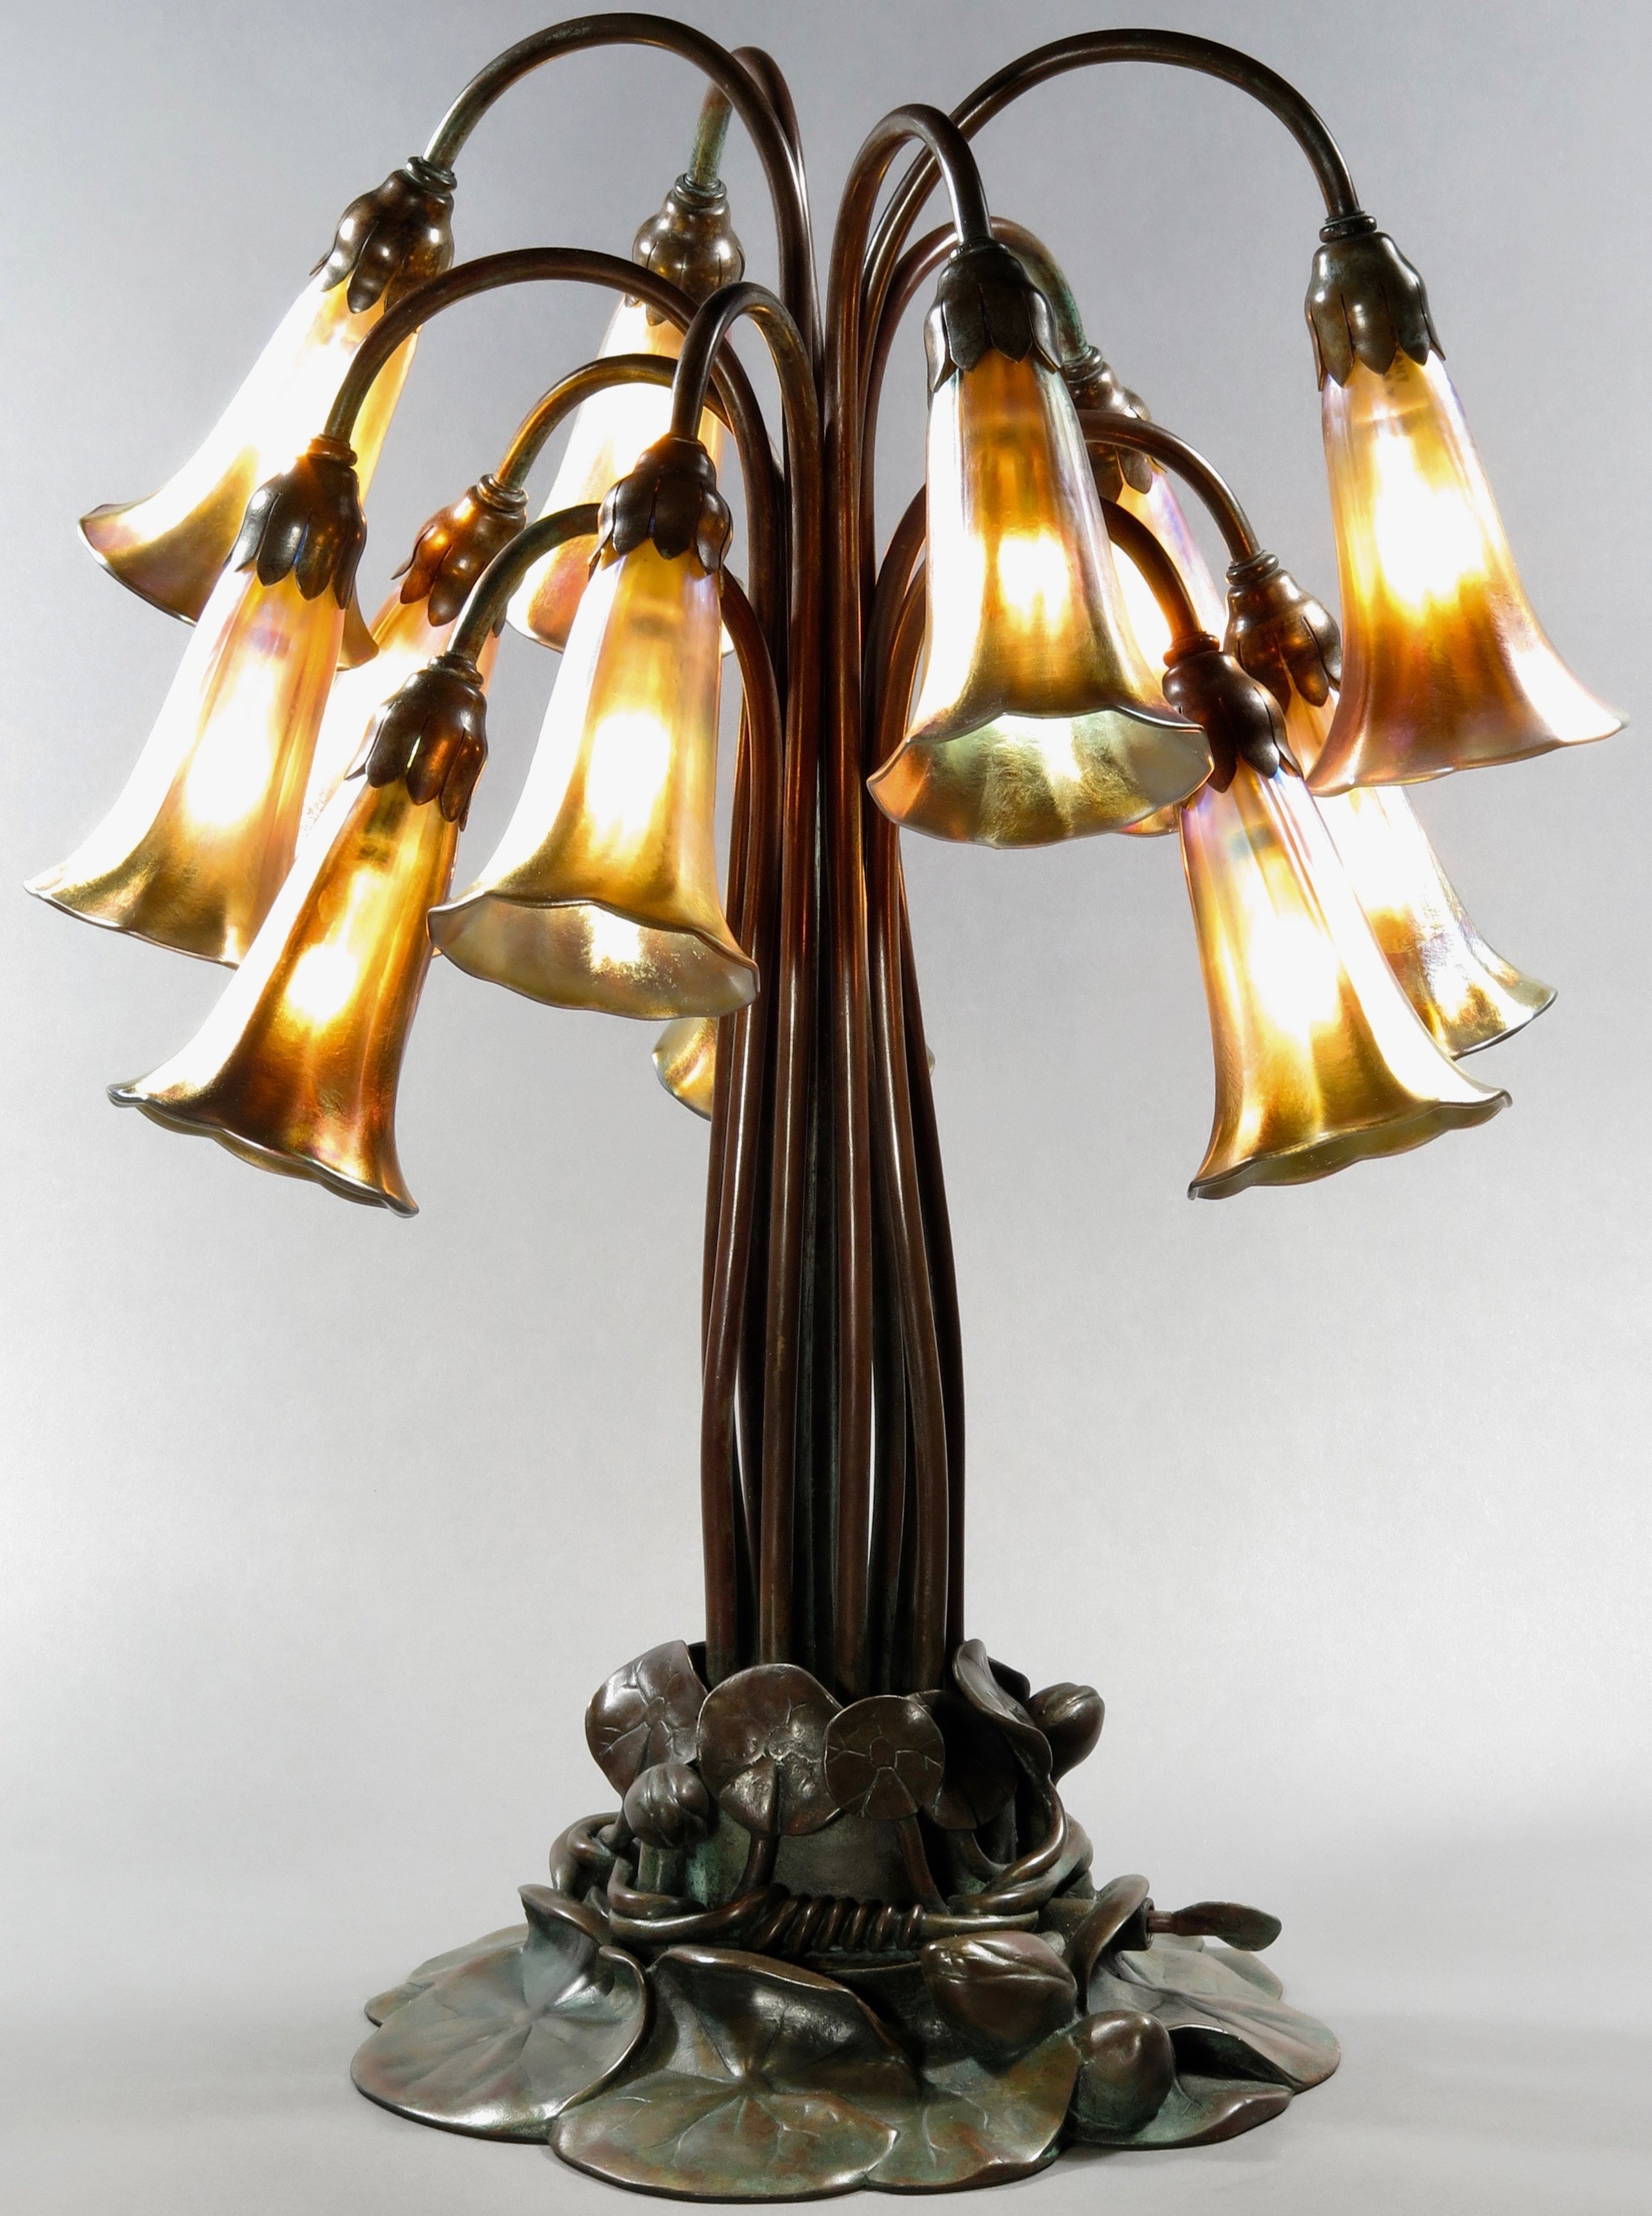 Tiffany studios patinated 12 light lily table lamp